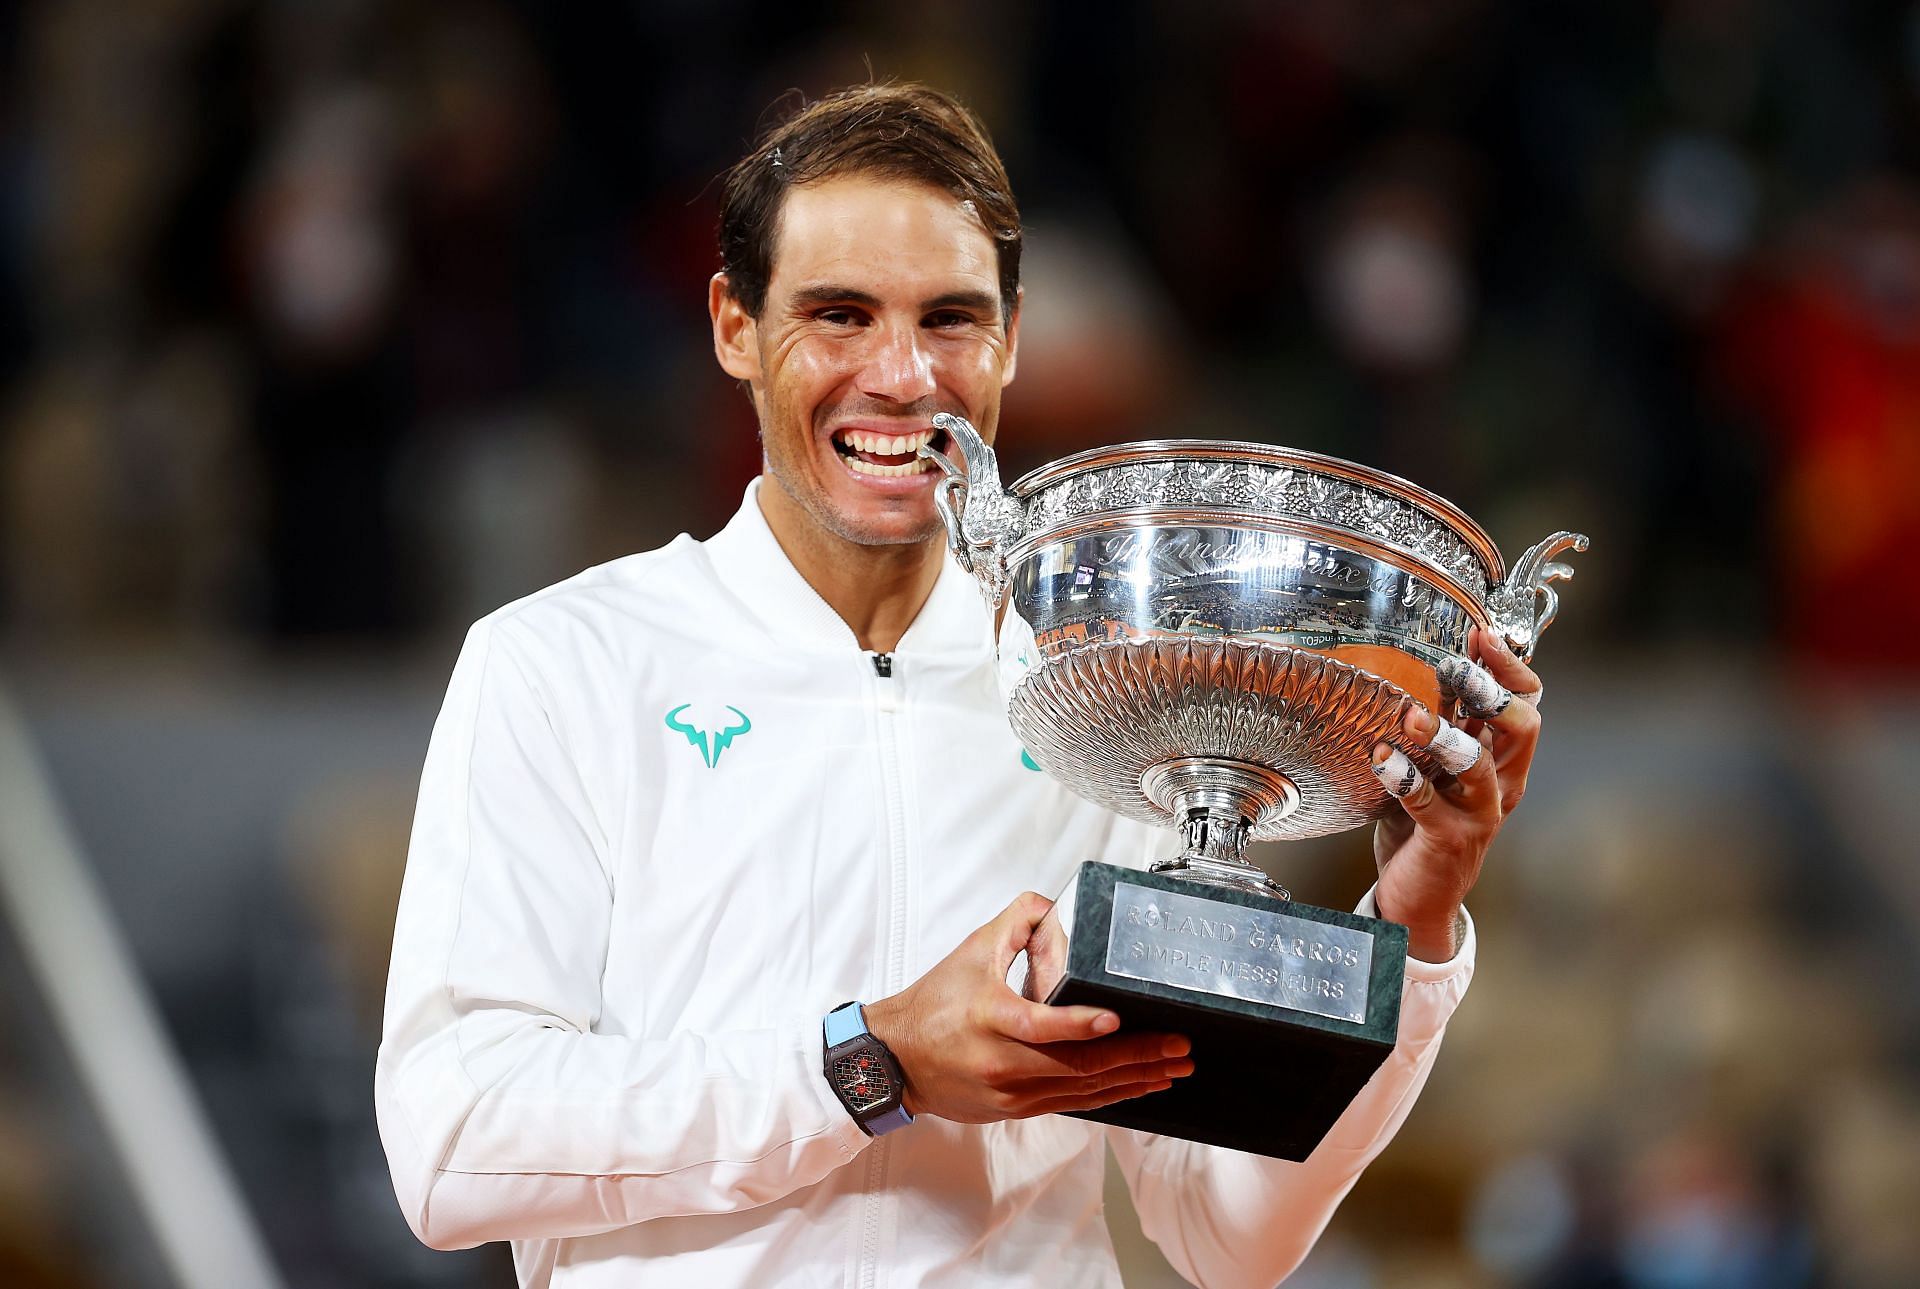 Rafael Nadal at the 2020 French Open